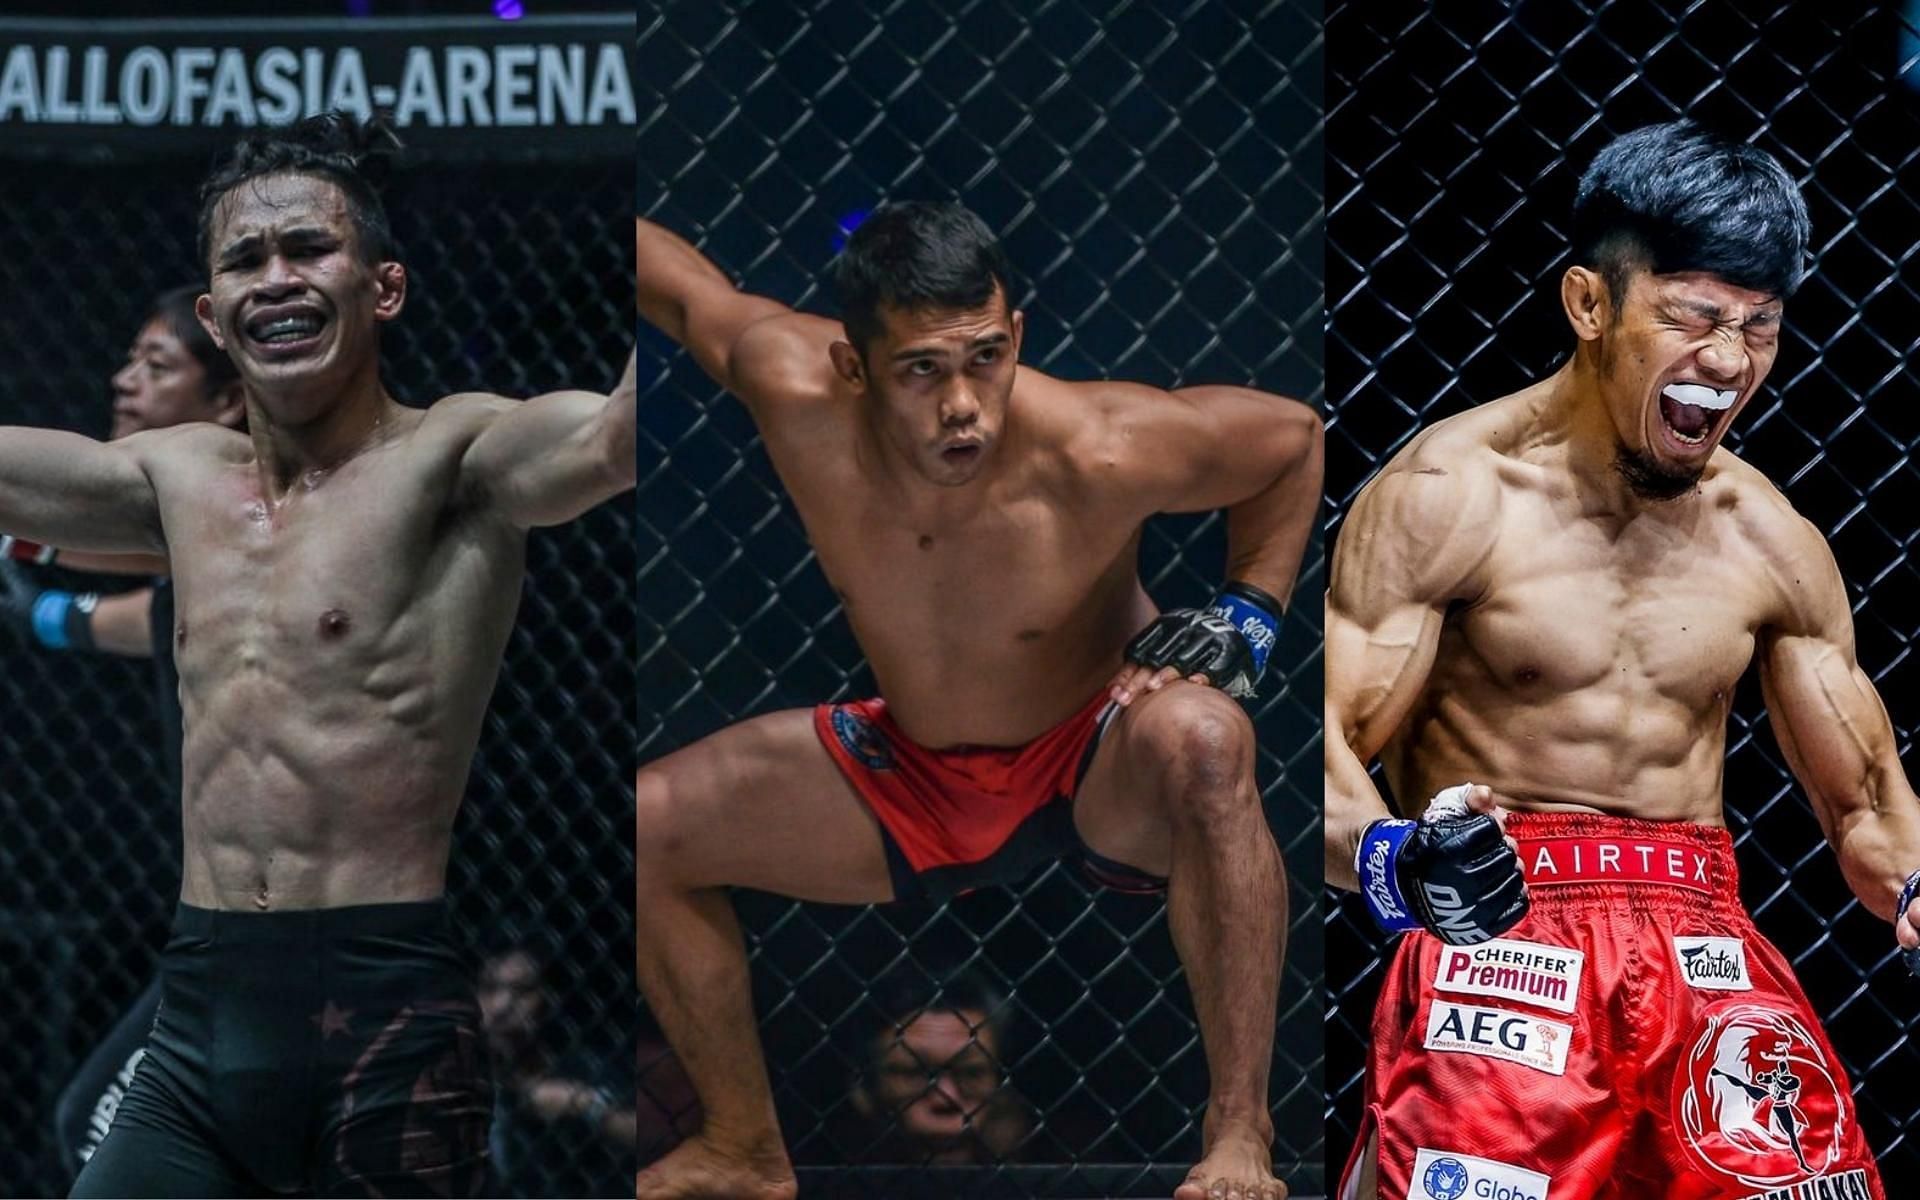 Robin Catalan (middle) provided some insight on the fight between Jeremy Miado (left) and Lito Adiwang (right) at ONE Championship: X. (Images courtesy of ONE Championship)